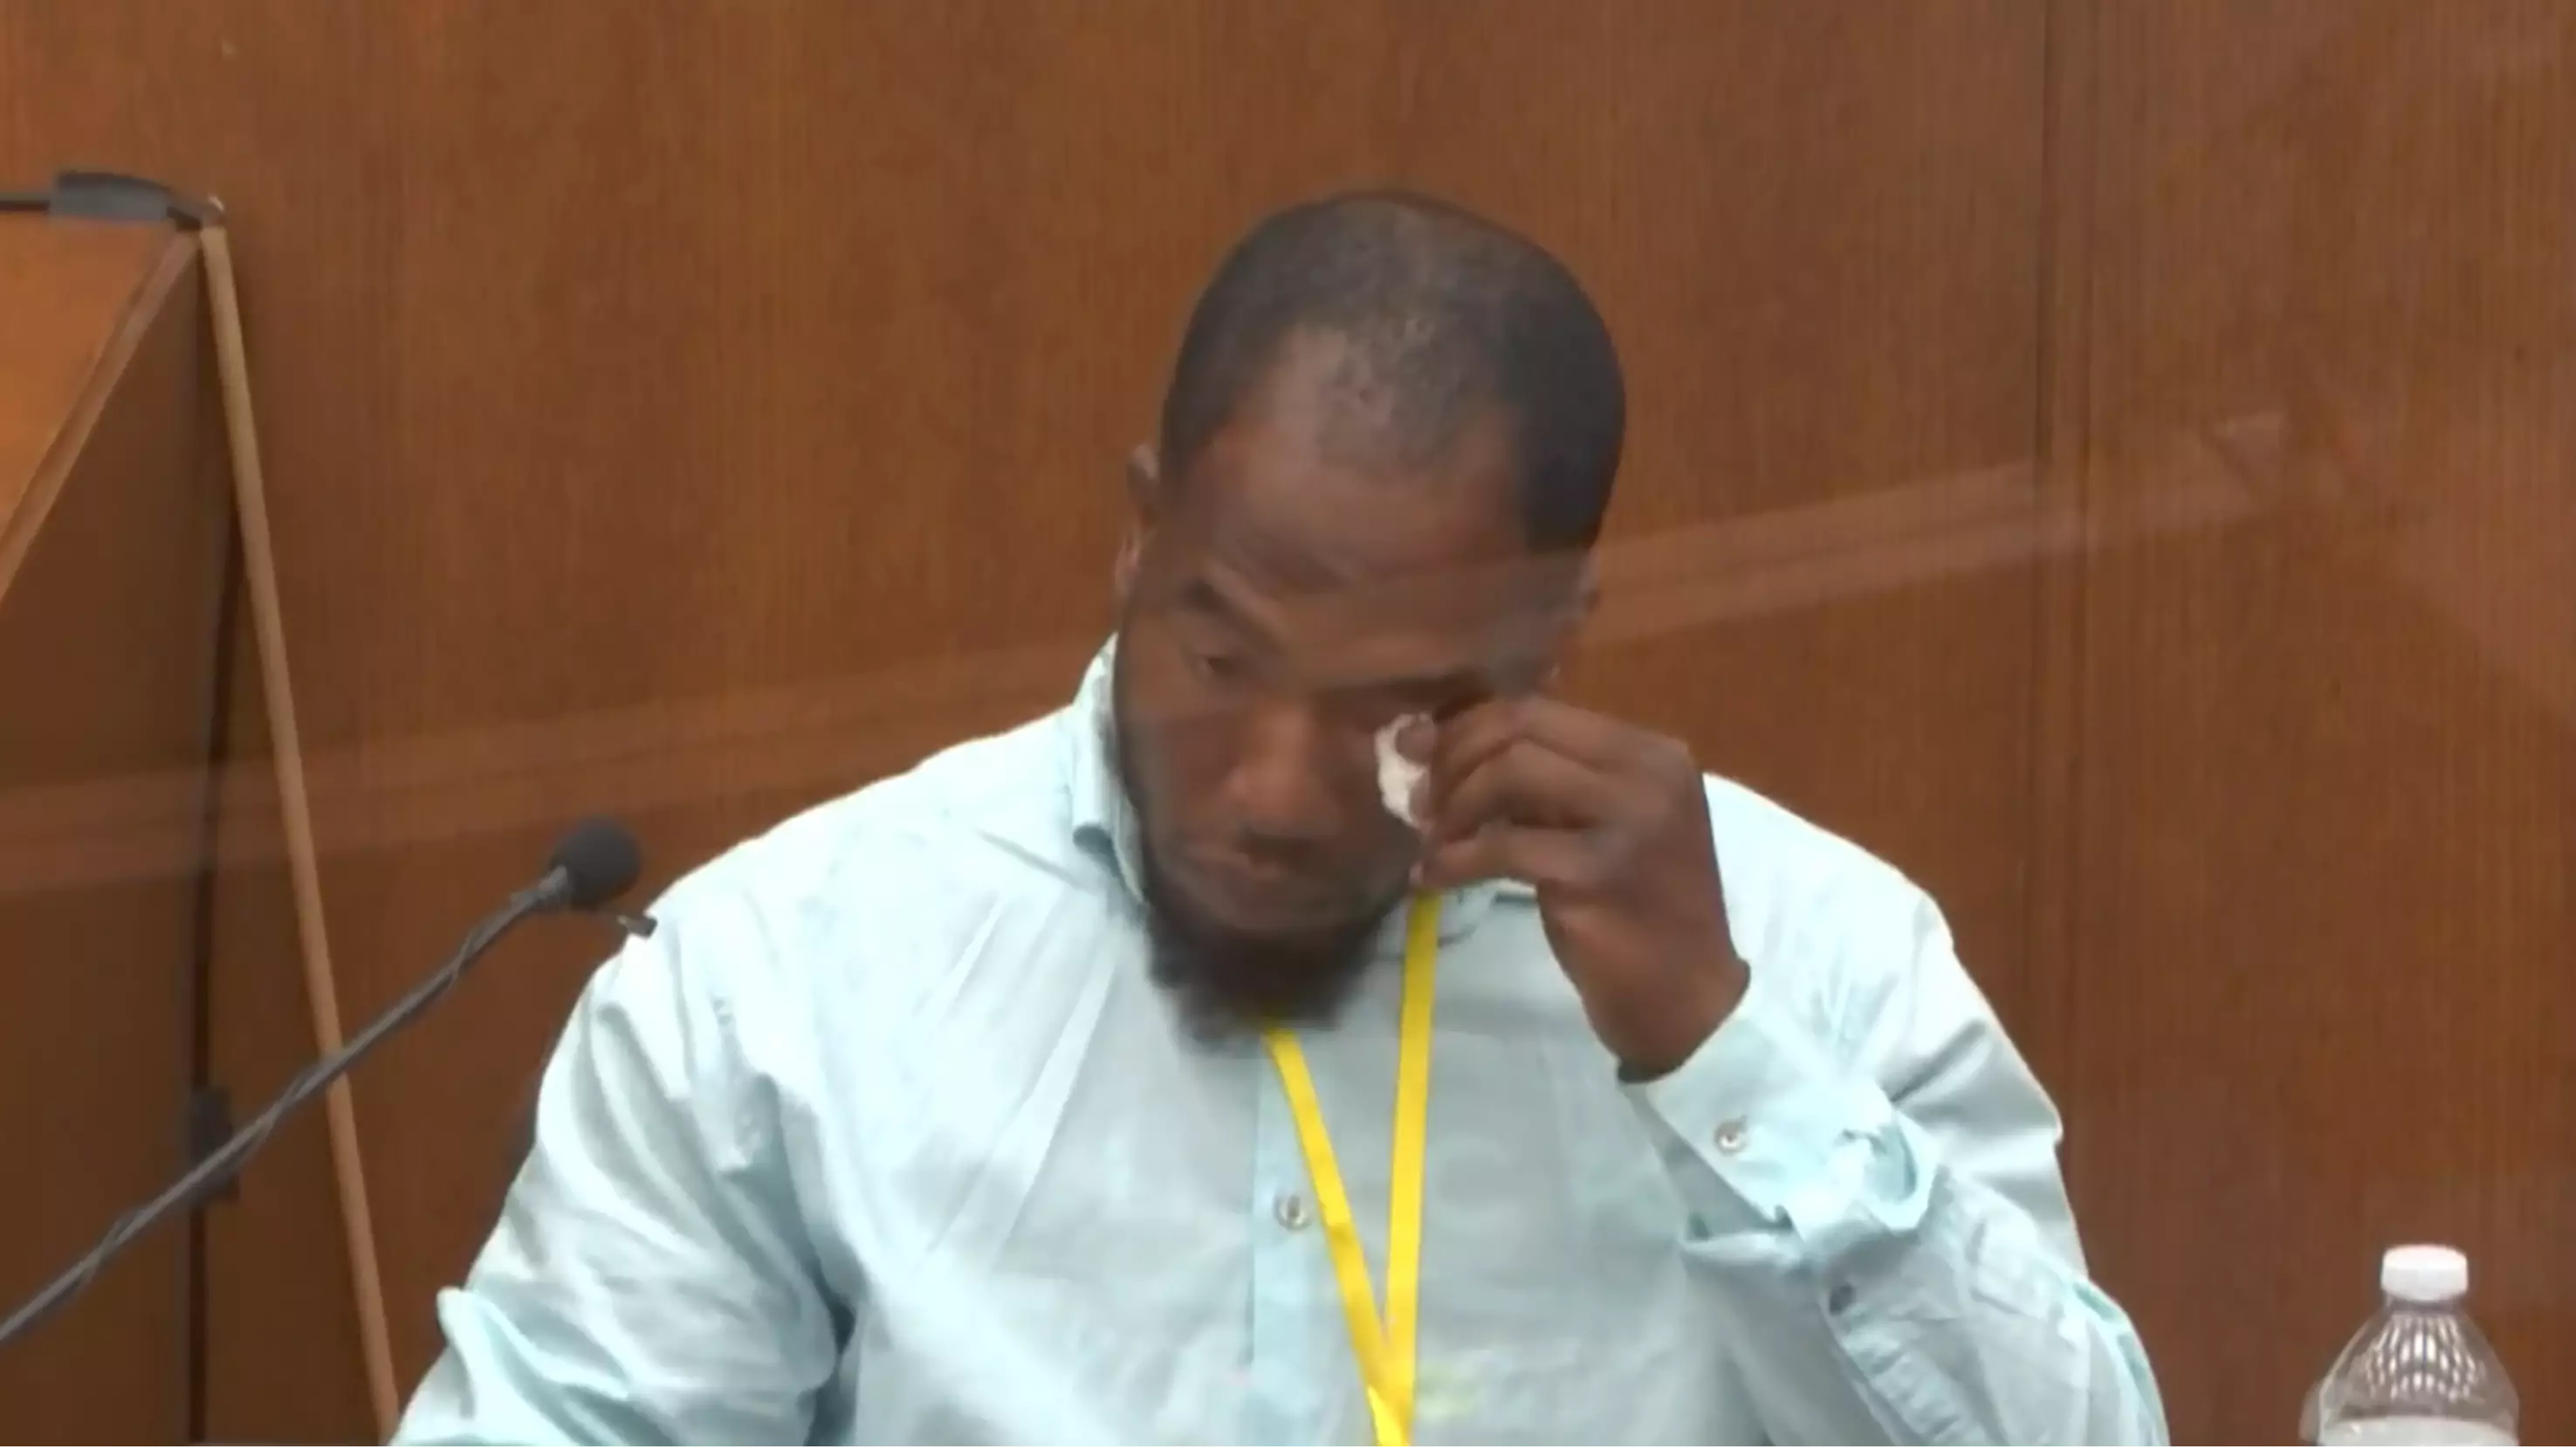 Man Who Saw George Floyd's Death Becomes Tearful In Court